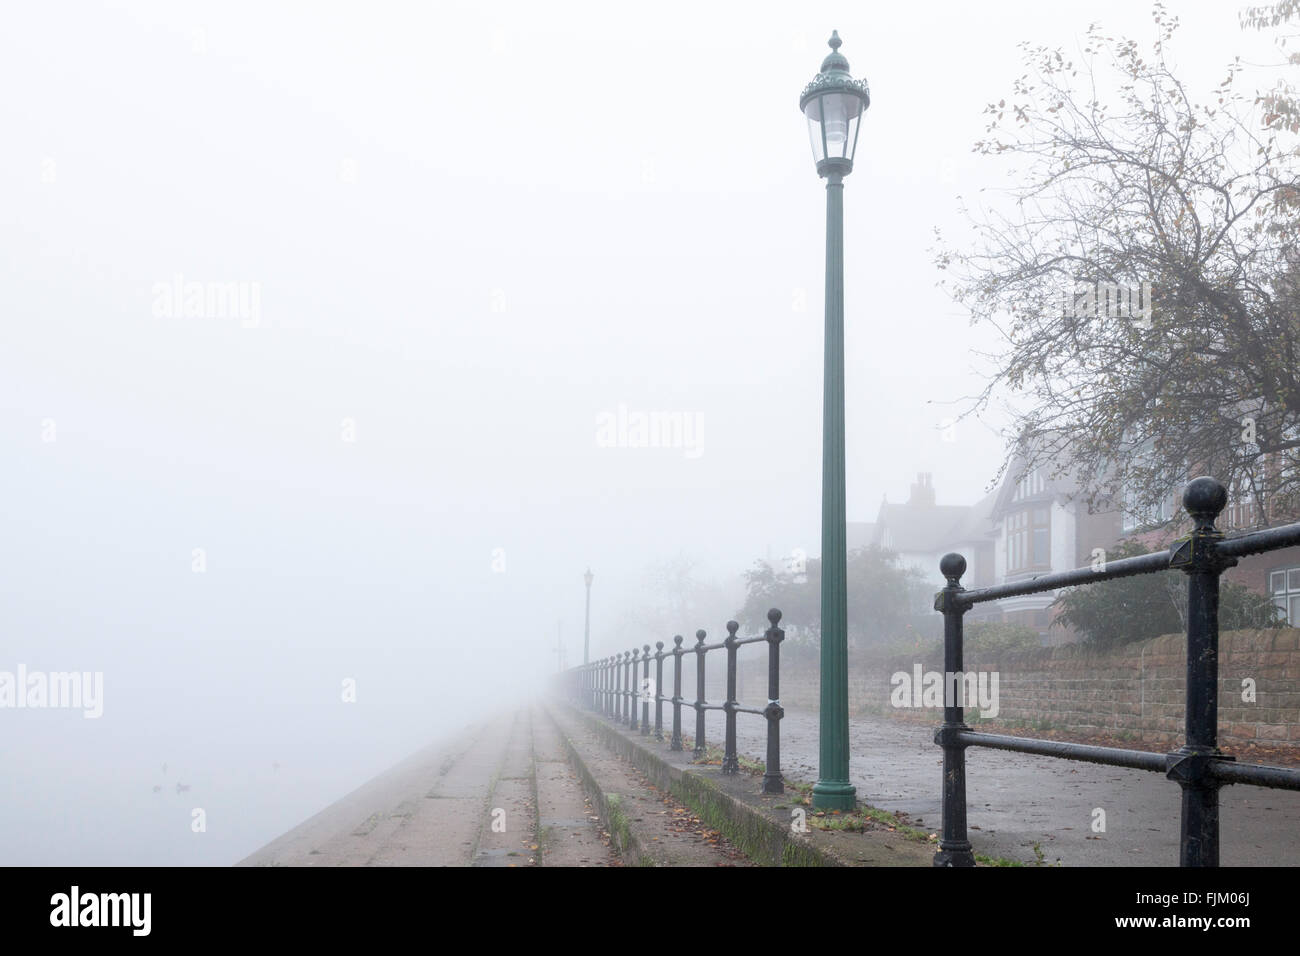 Foggy scene. Old lamp post and railings in fog on a footpath by the River Trent in Autumn. West Bridgford, Nottinghamshire, England, UK Stock Photo